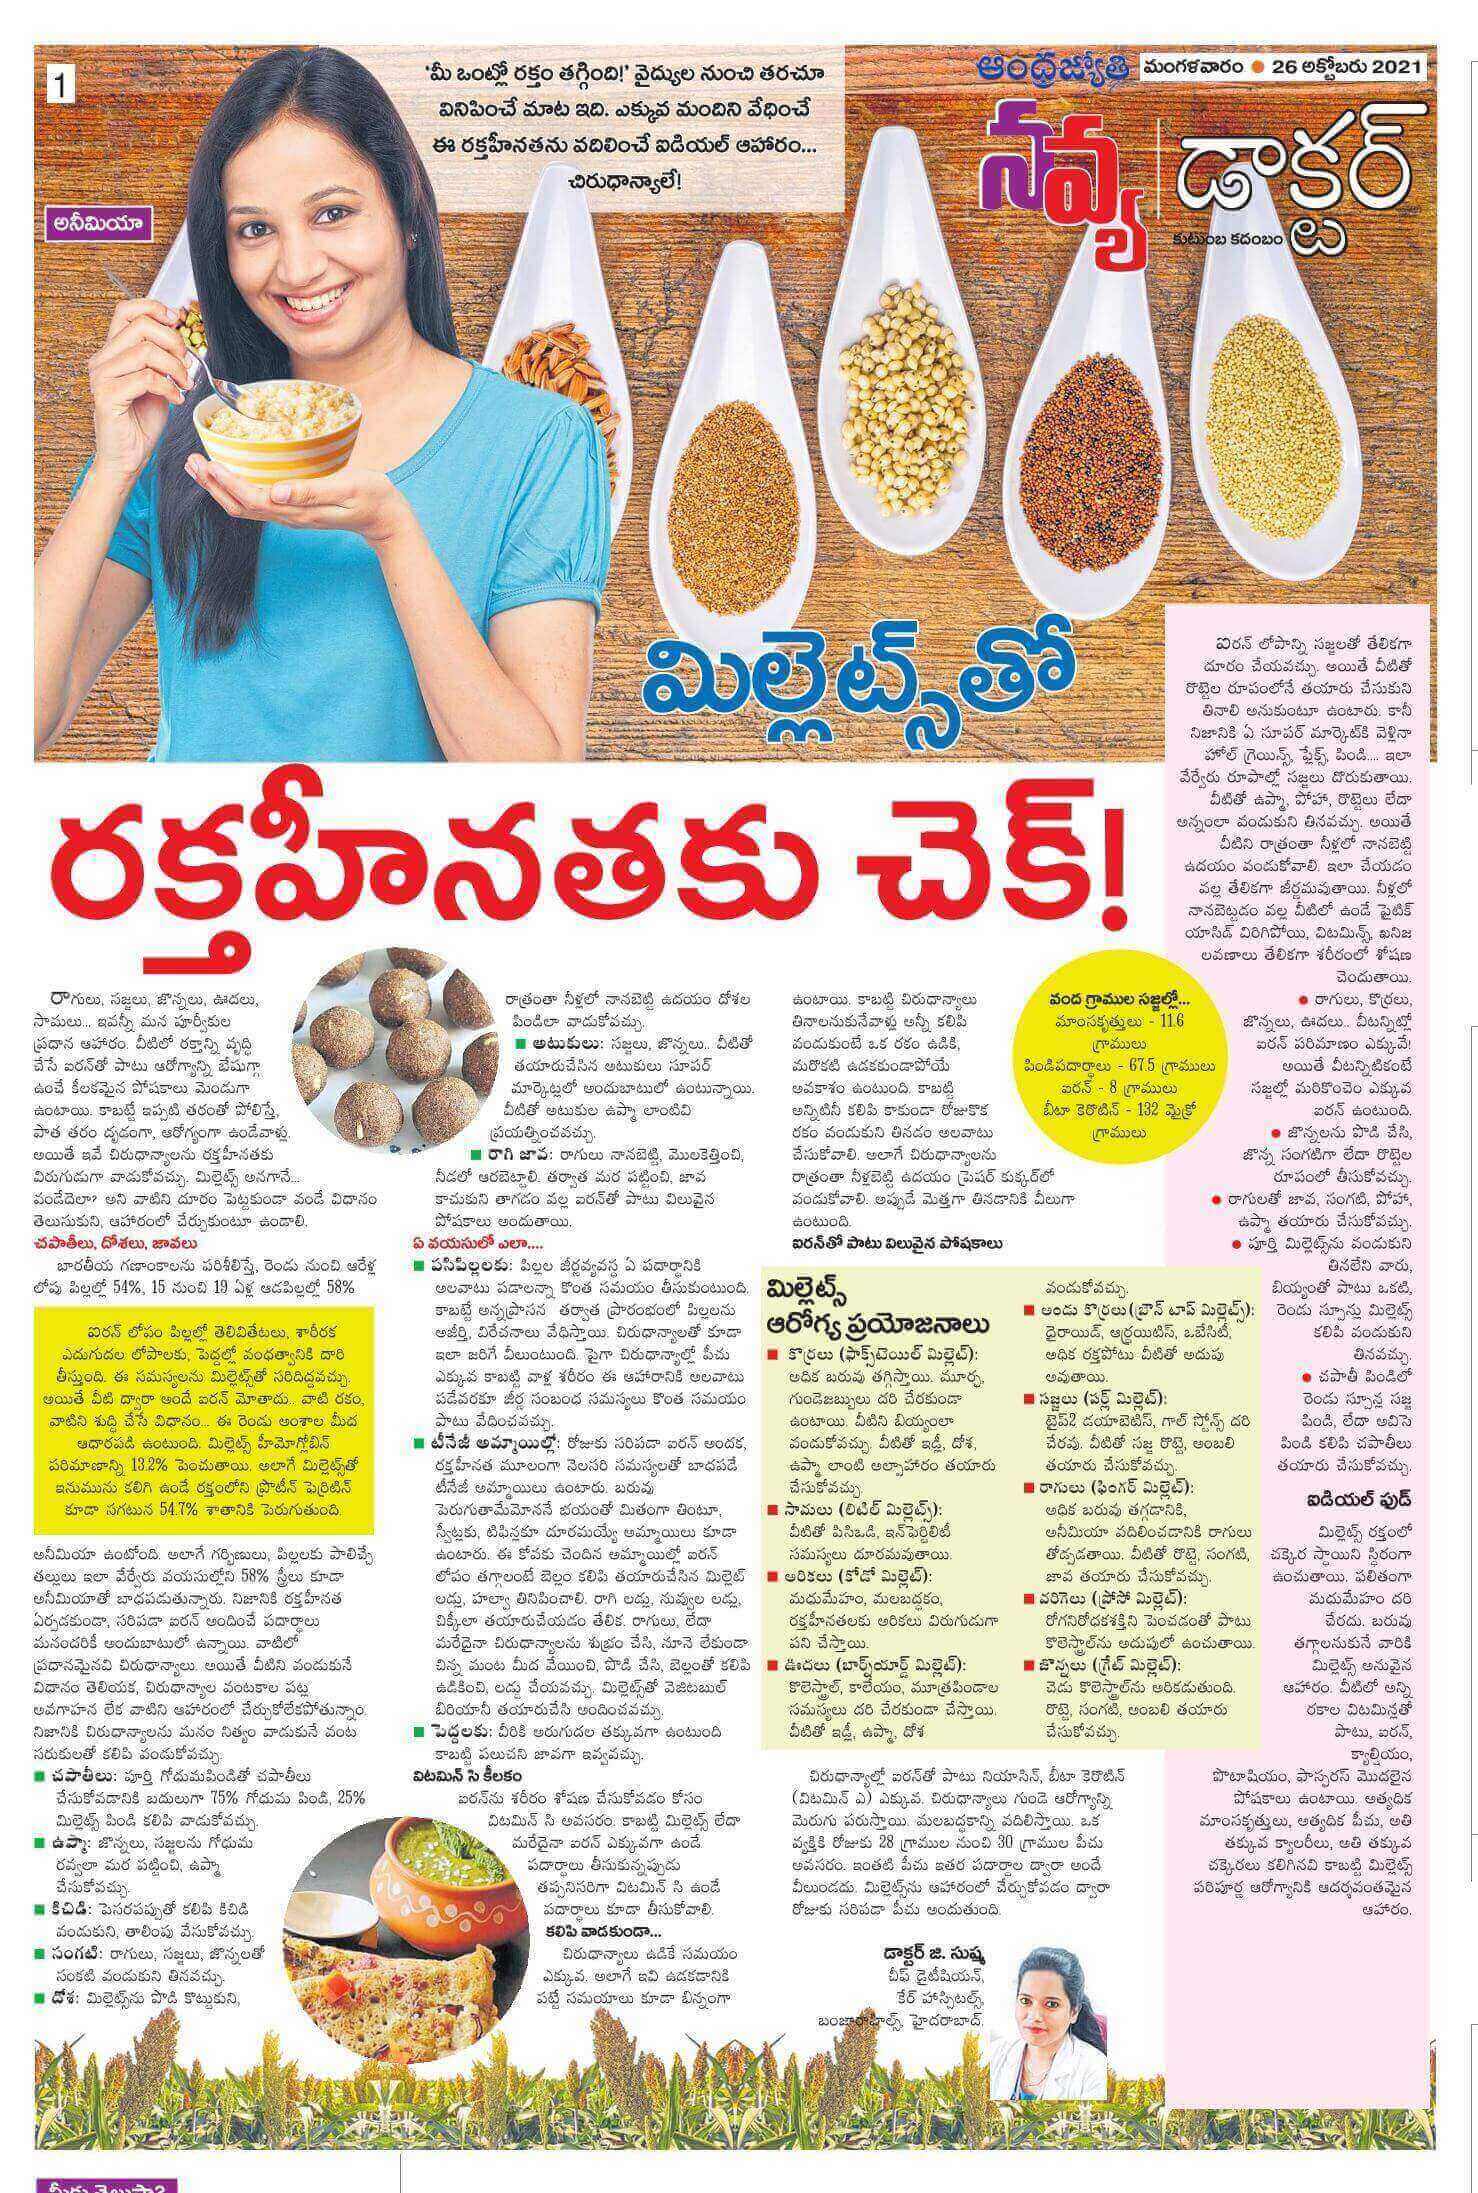 Article on Millets and Nutritional values by G Sushma - Chief Dietician